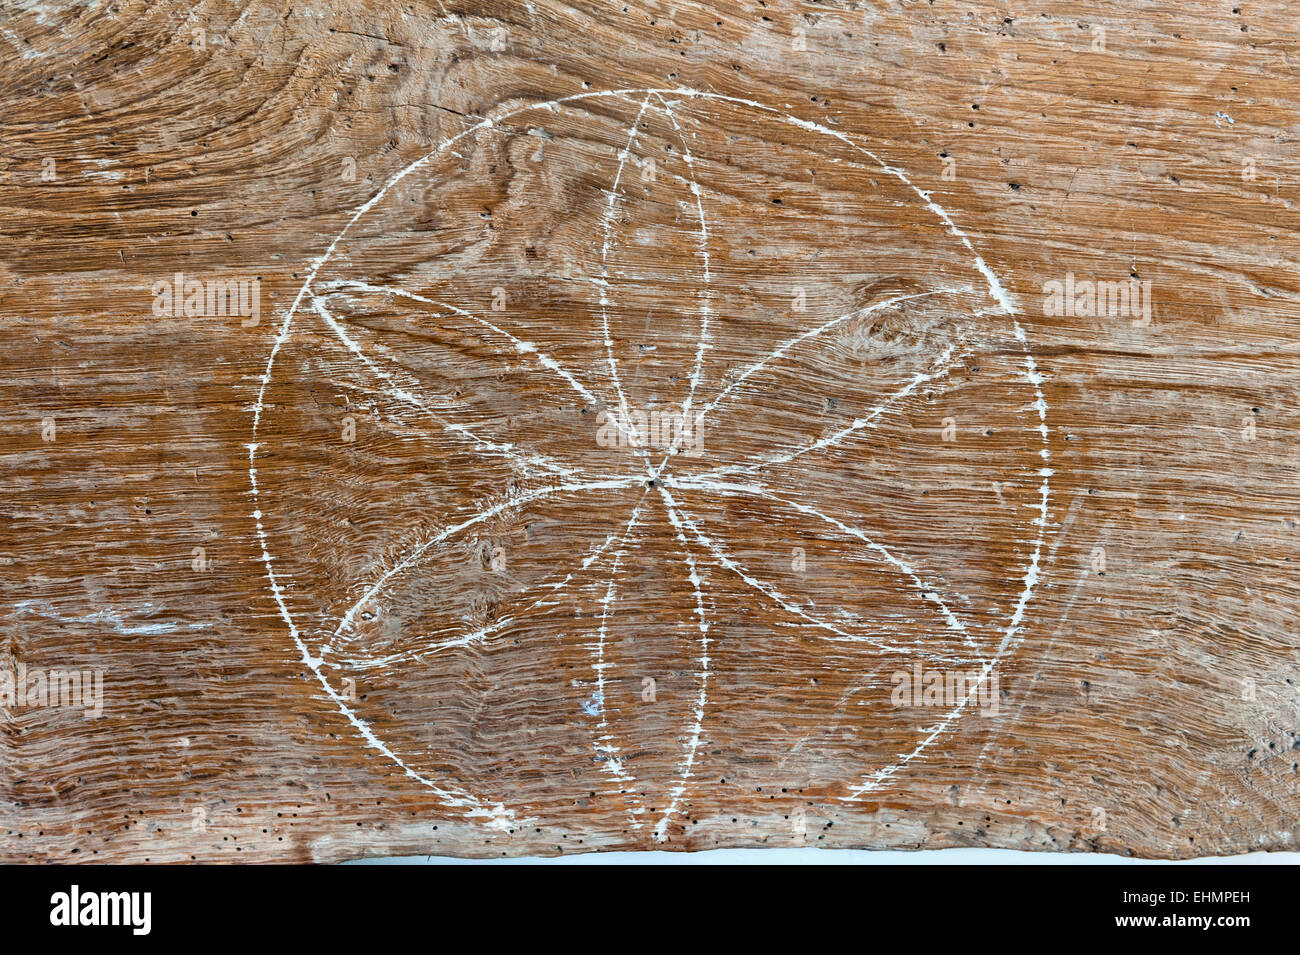 A witch mark (apotropaic mark) in a 16c Herefordshire house (UK). A protective sign in a daisy wheel shape carved into a wooden beam Stock Photo